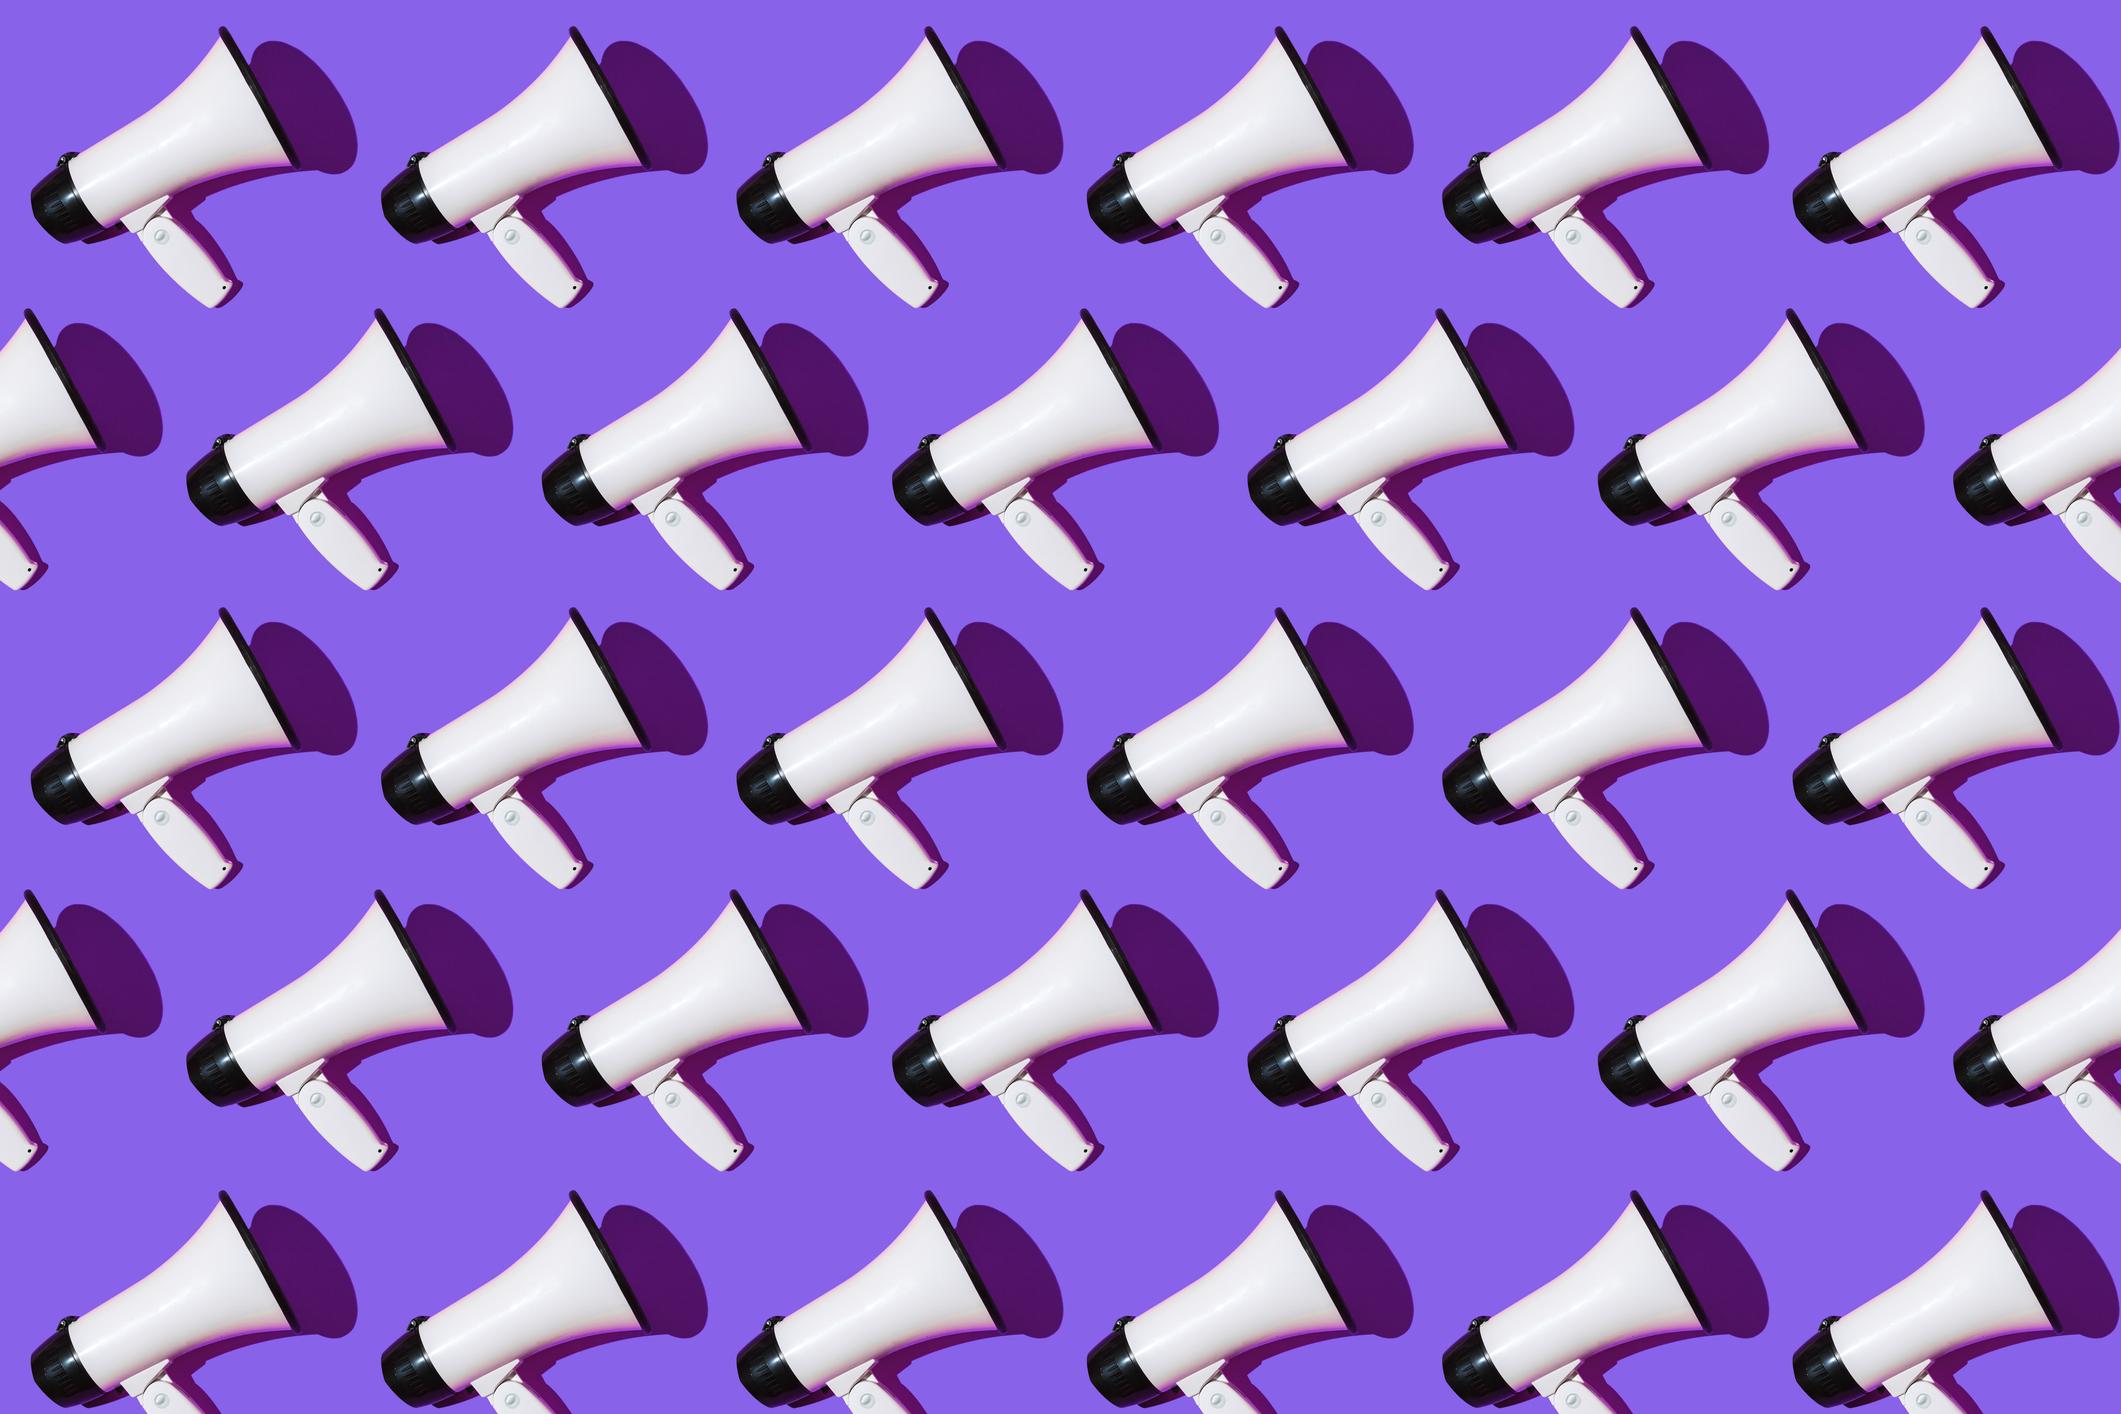 Pattern of white megaphones with black ornament on purple background.  Shout, announcement, message and news concept.